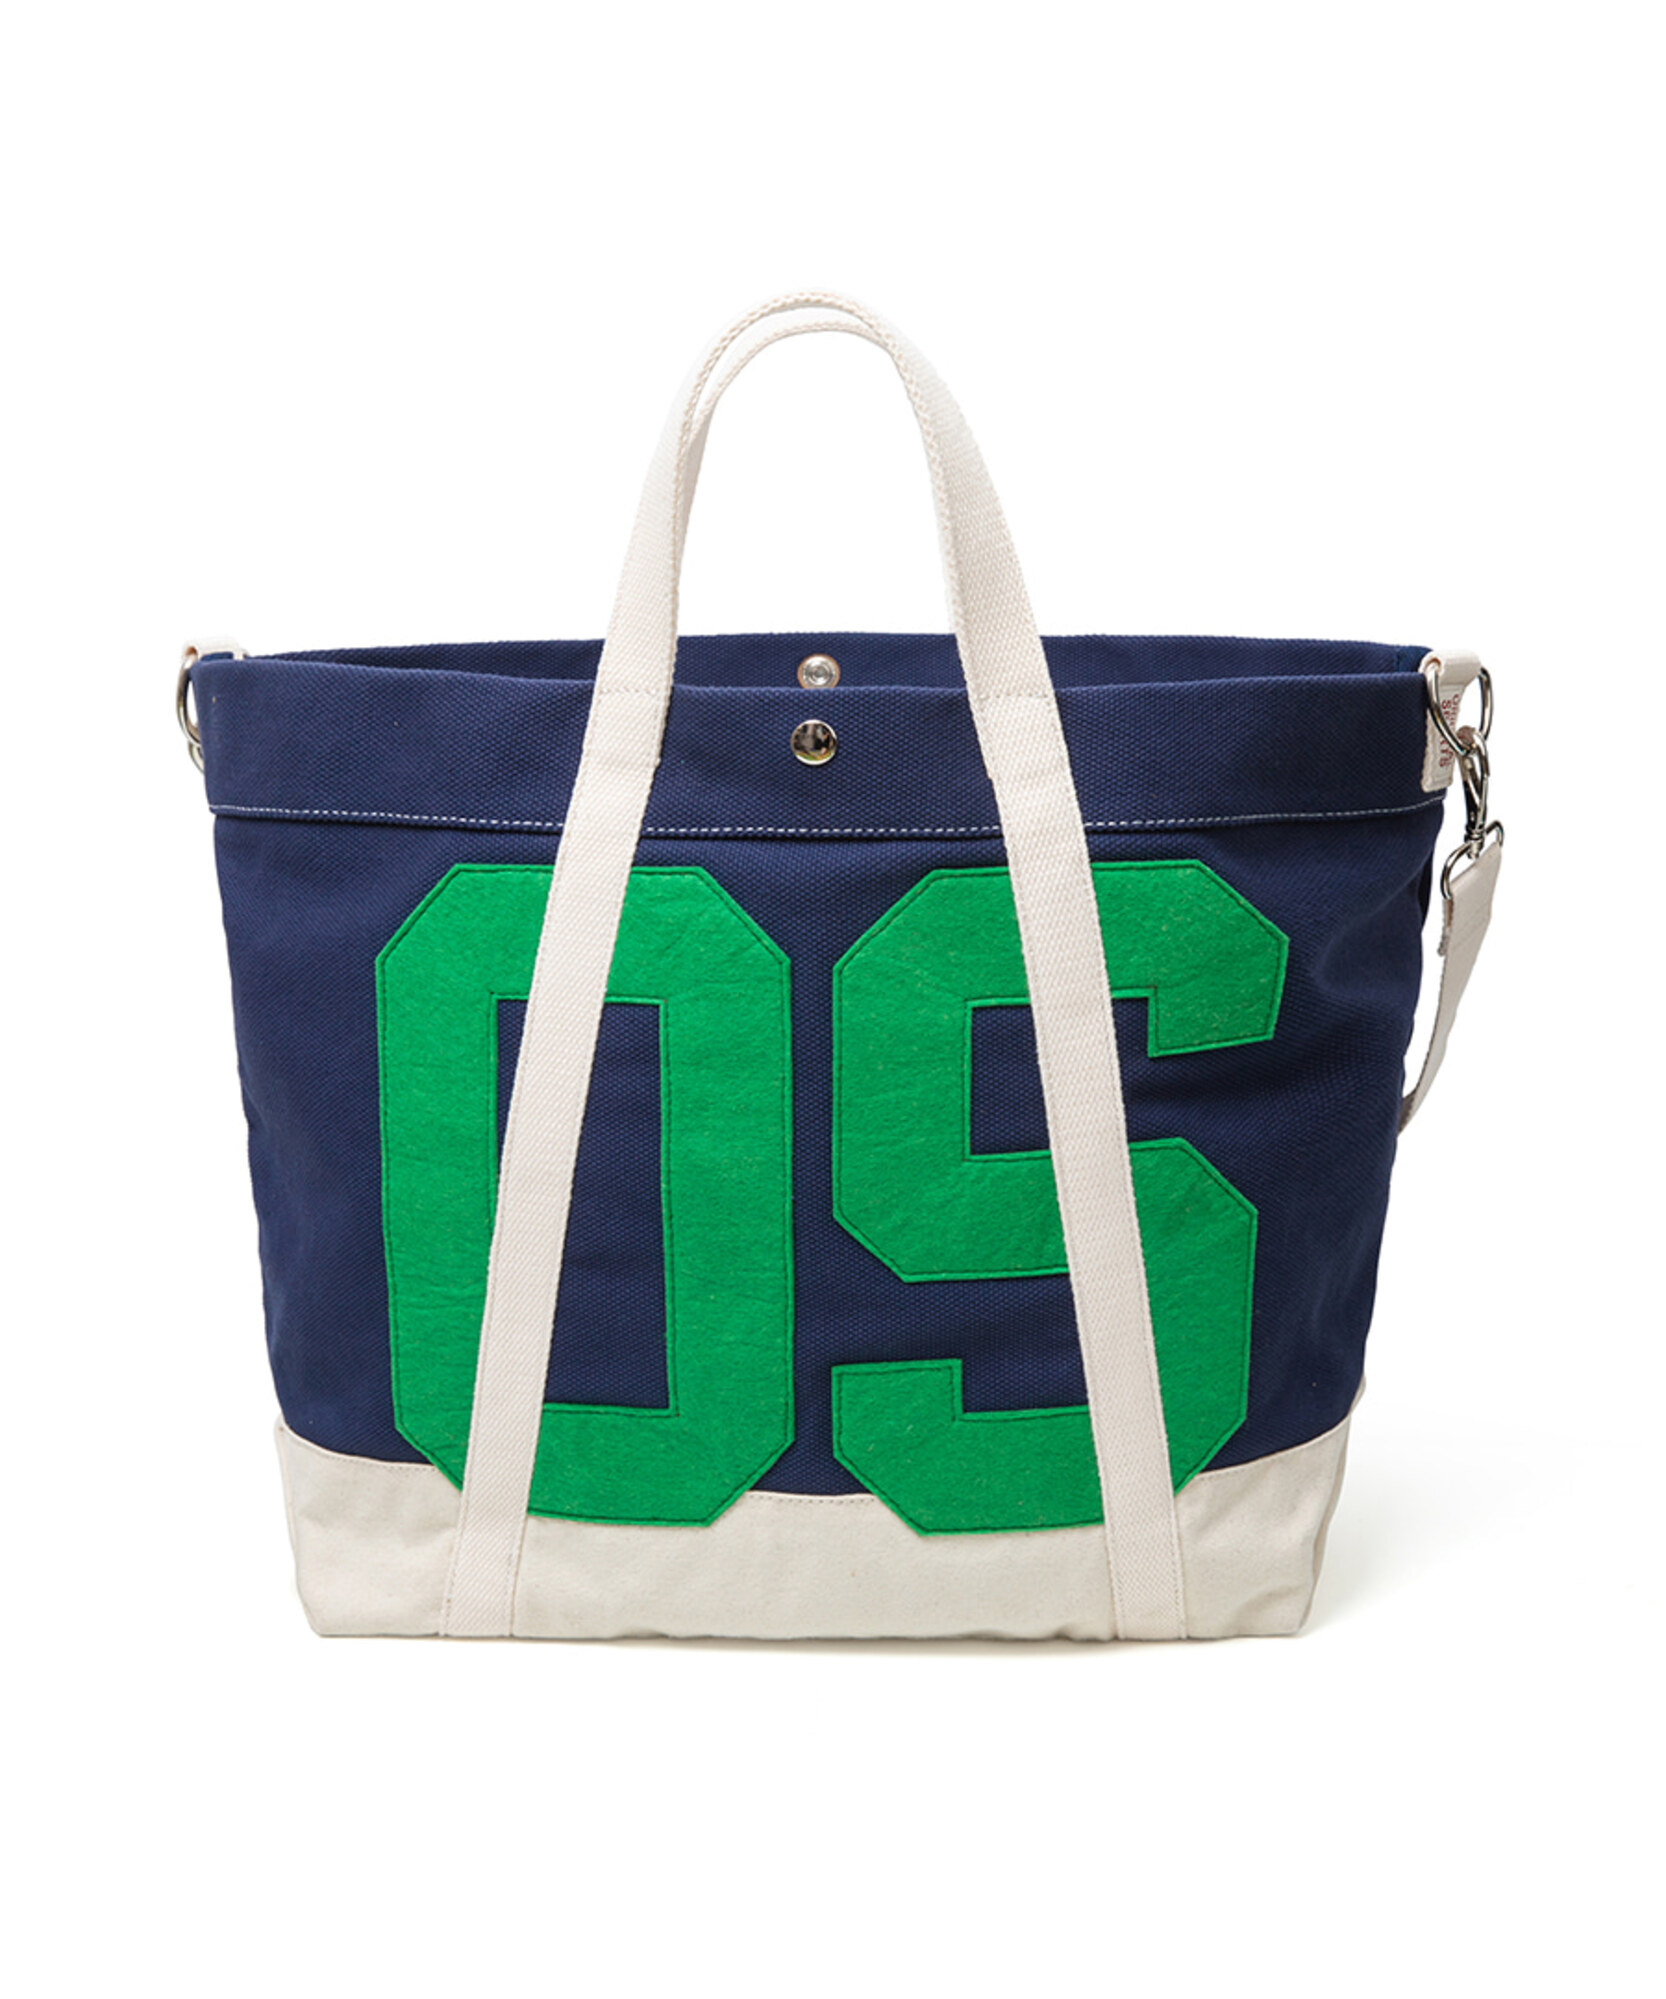 CANVAS TOTE WITH STRAP NAVY